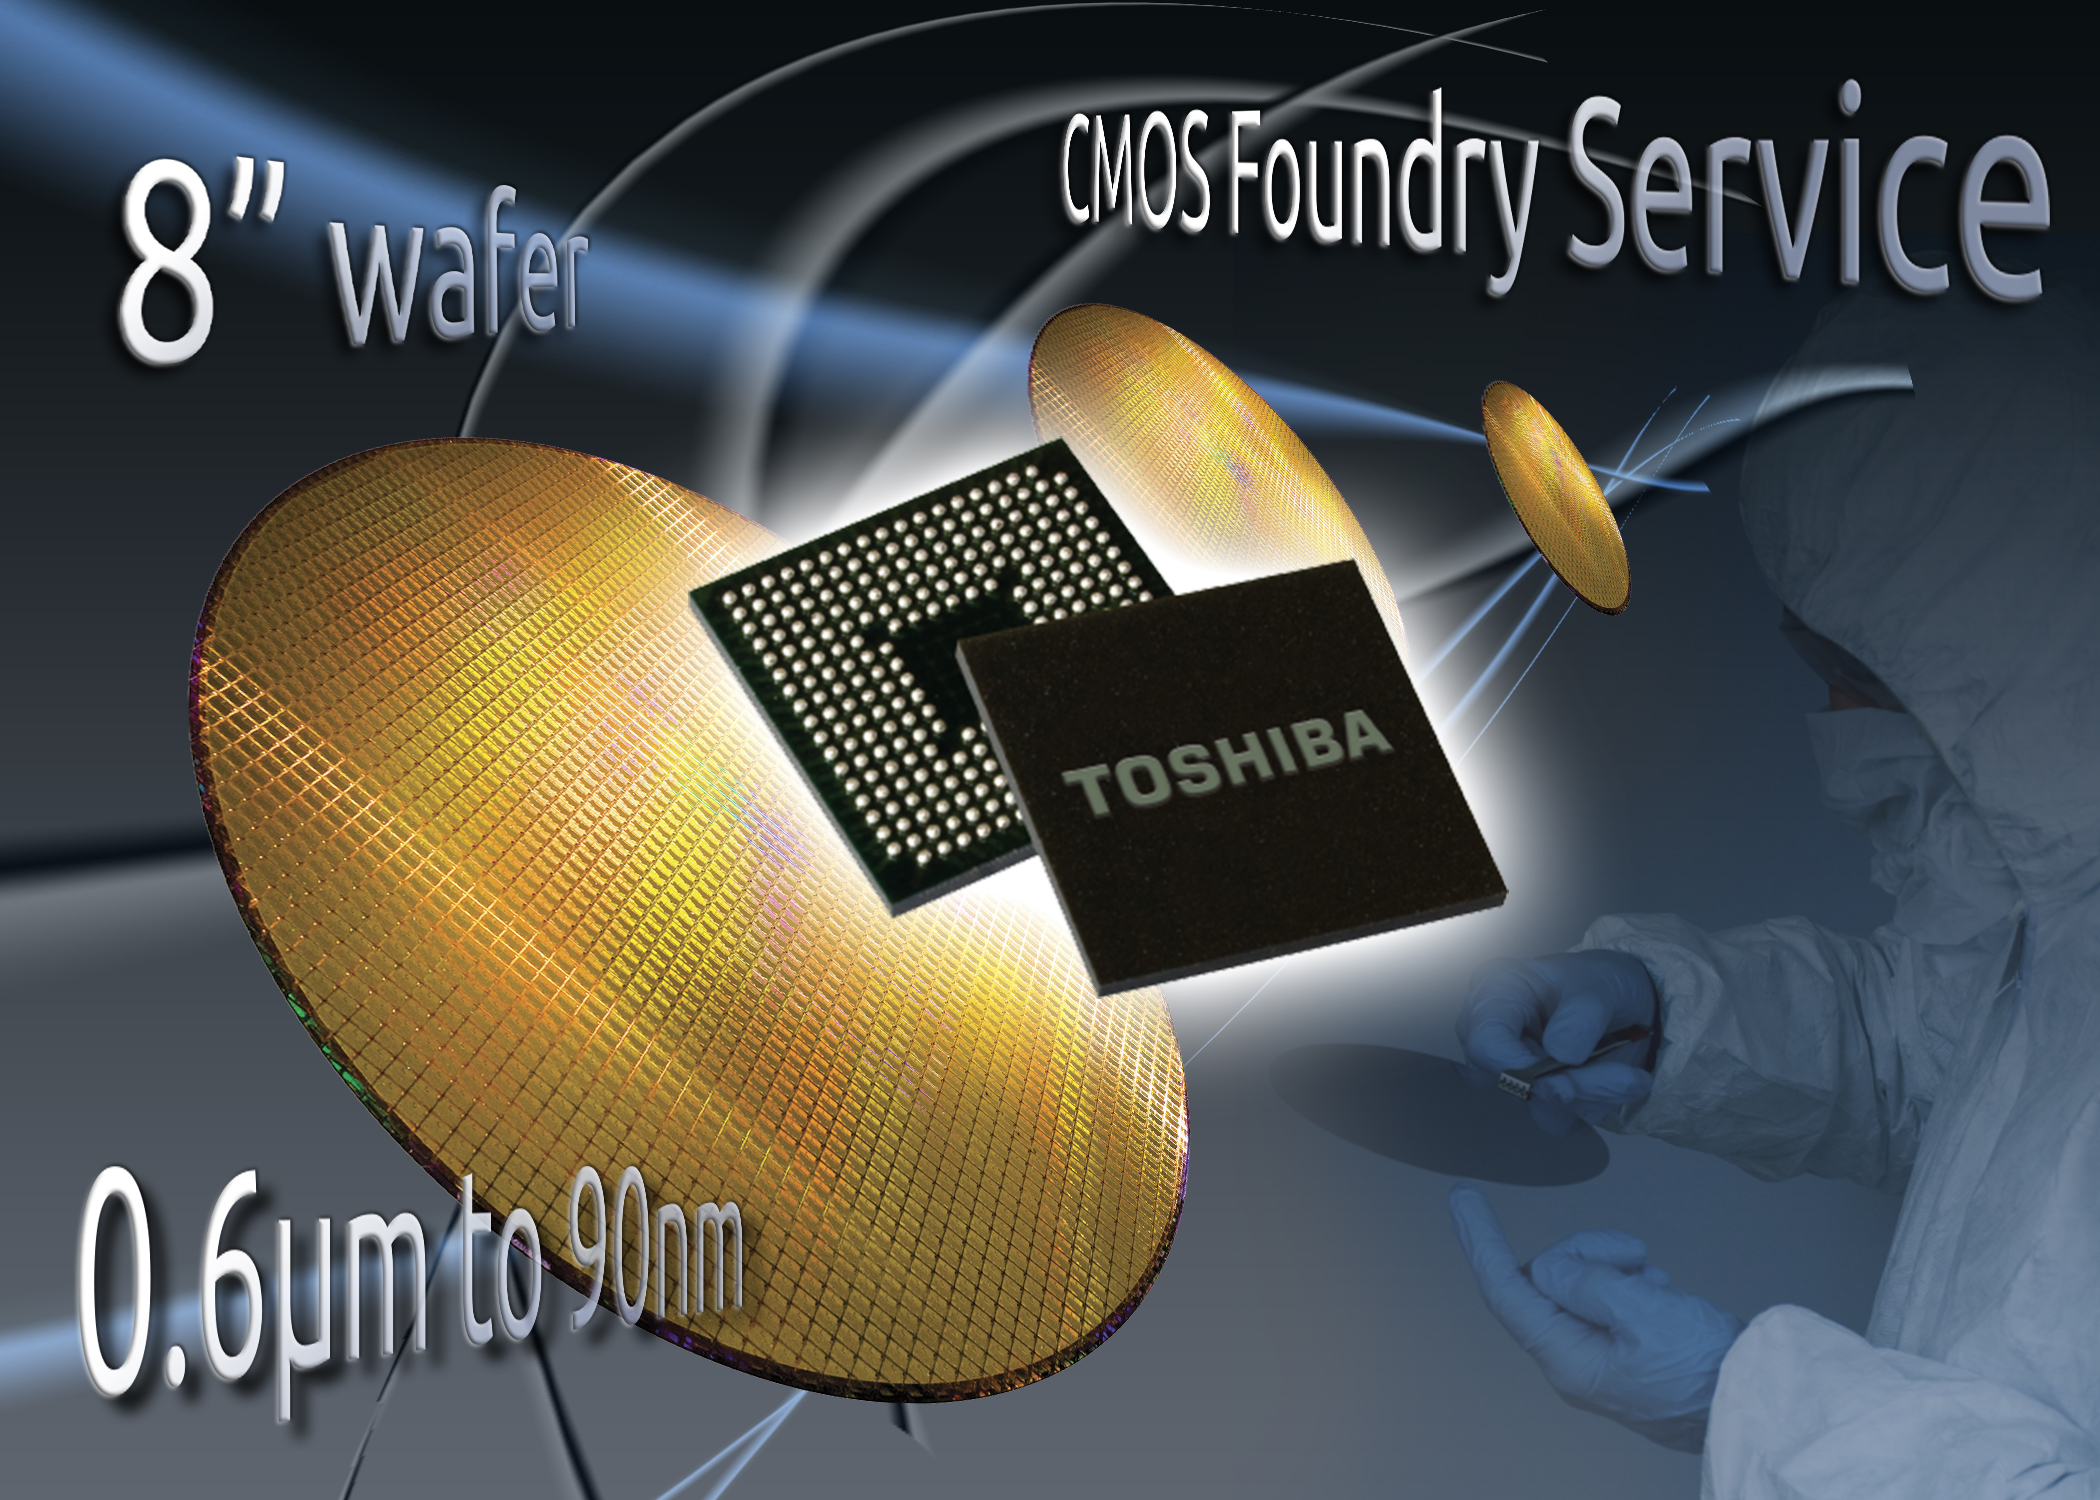 Europe offered flexible CMOS development and foundry service by Toshiba